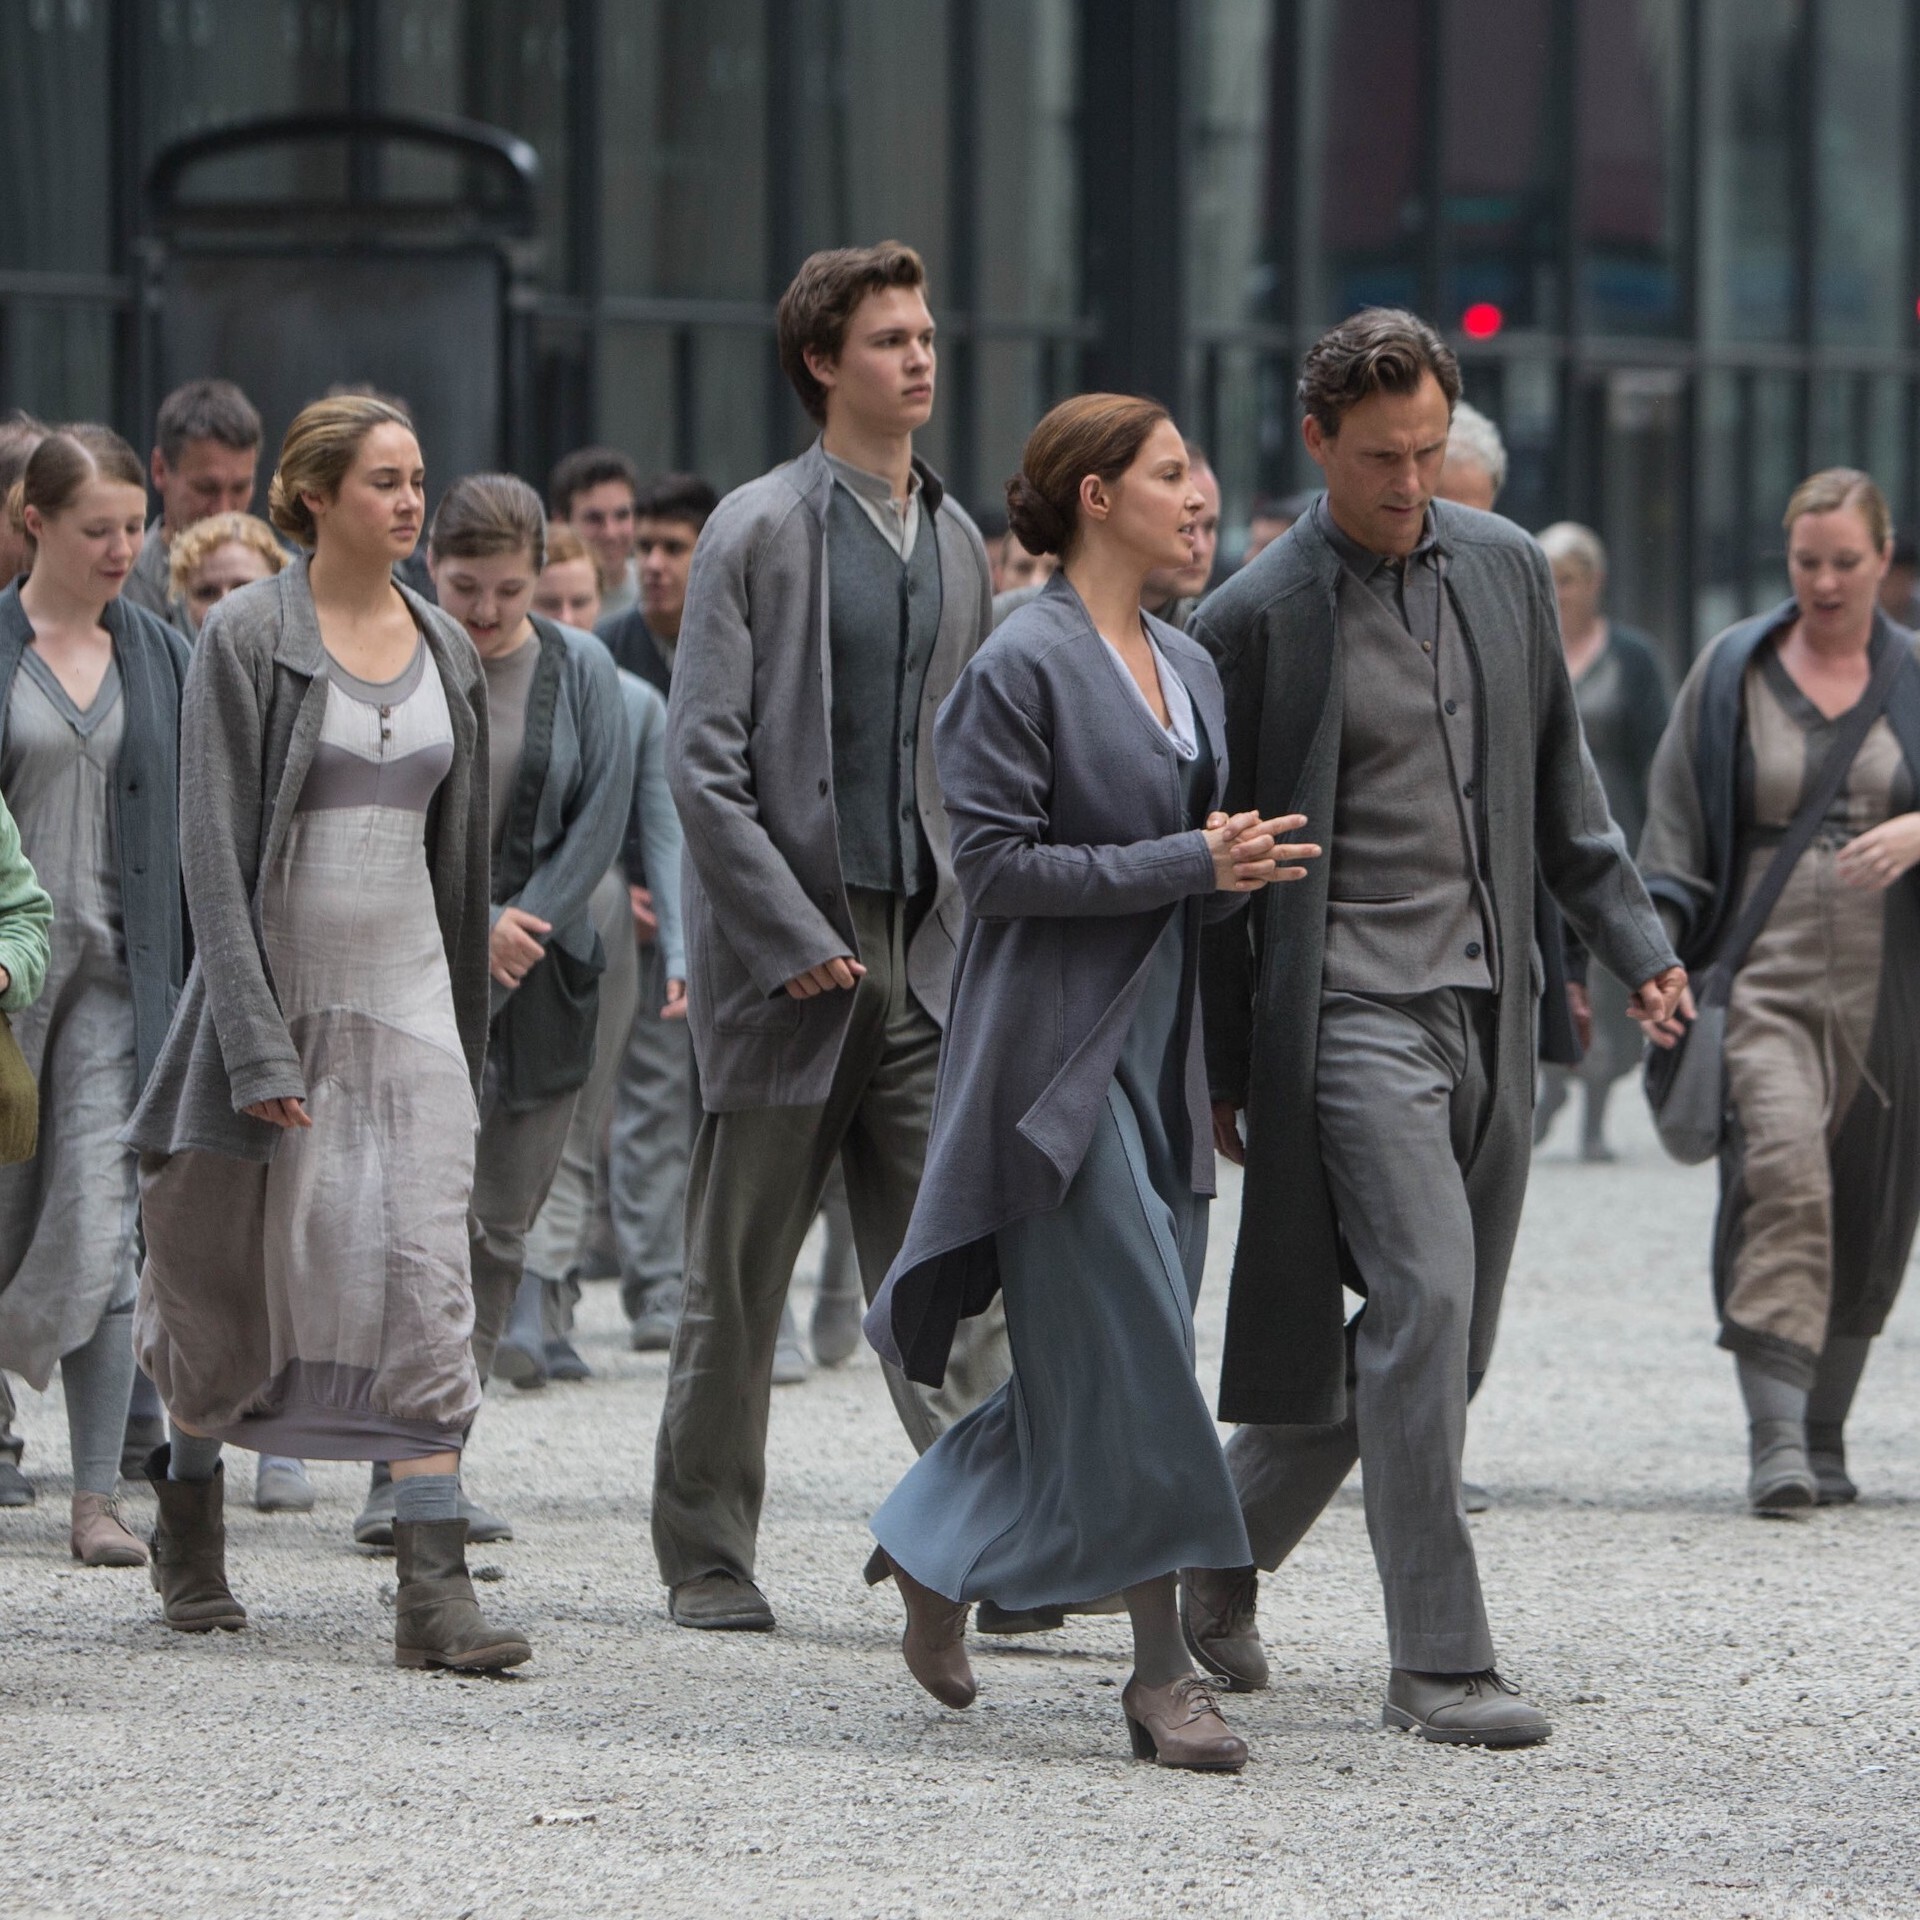 Divergent Candor movie, Powerful symbolism, Moral dilemmas, Finding one's purpose, 1920x1920 HD Handy